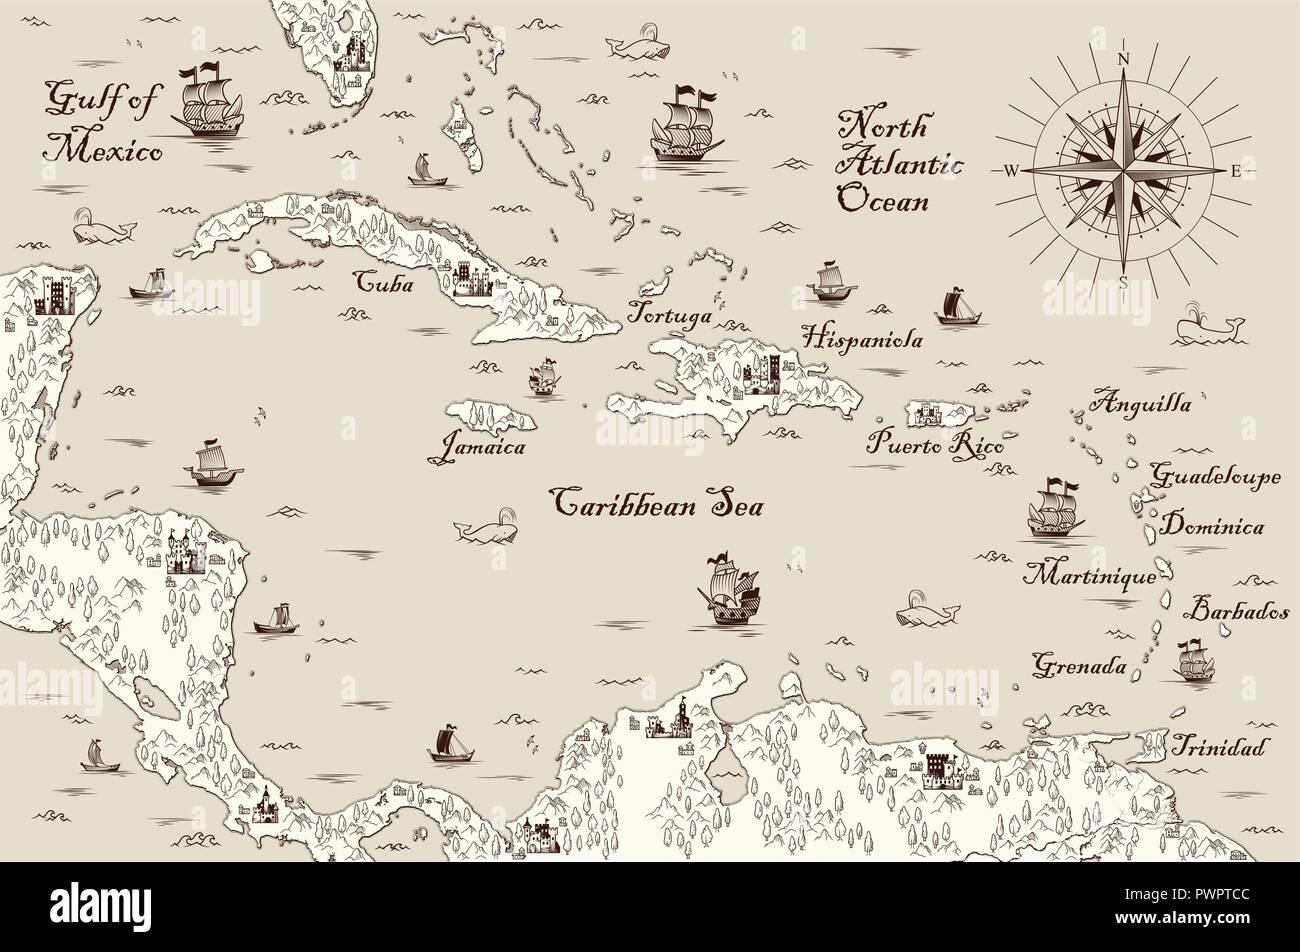 Old map of the Caribbean Sea, Vector illustration template for your design Stock Vector